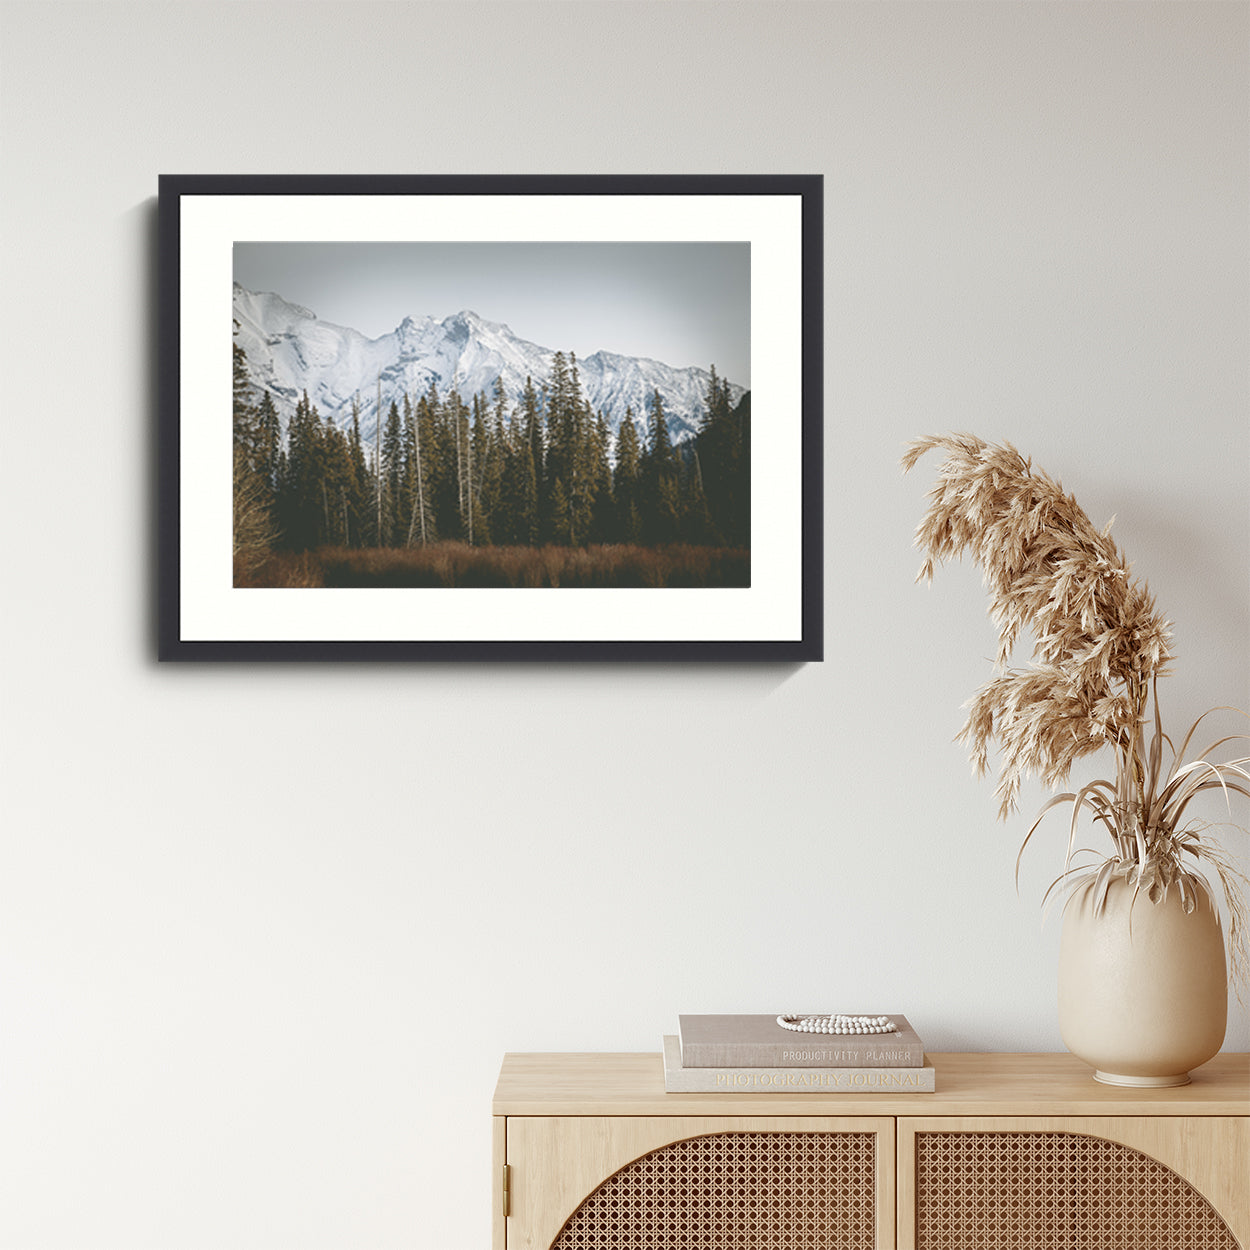 Landscape Photography Wall Art Print, snow capped mountains and pine trees nature photography in a black frame.  Wall Art in living room